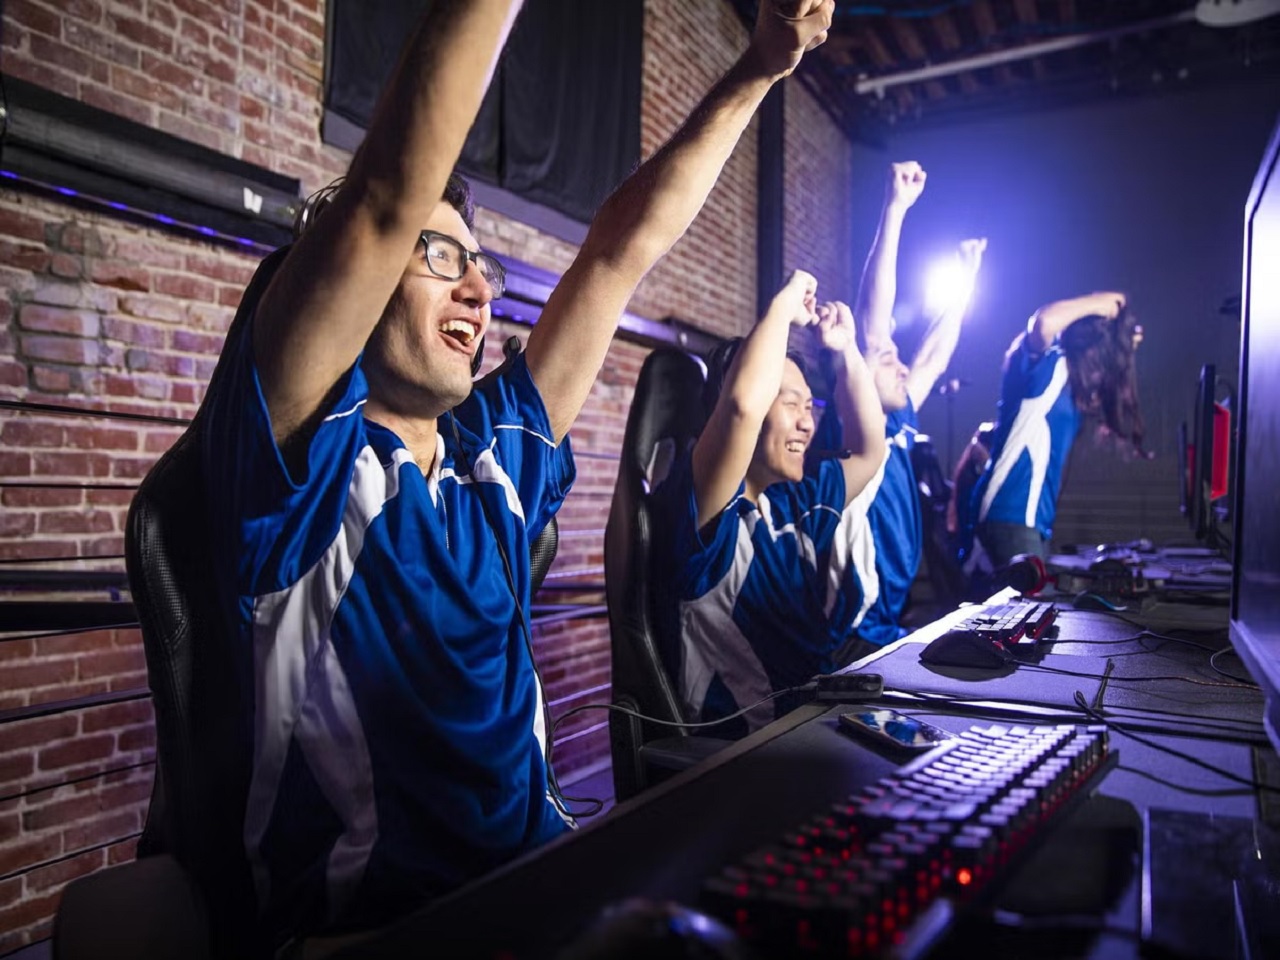 Explosive Growth of Esports Games